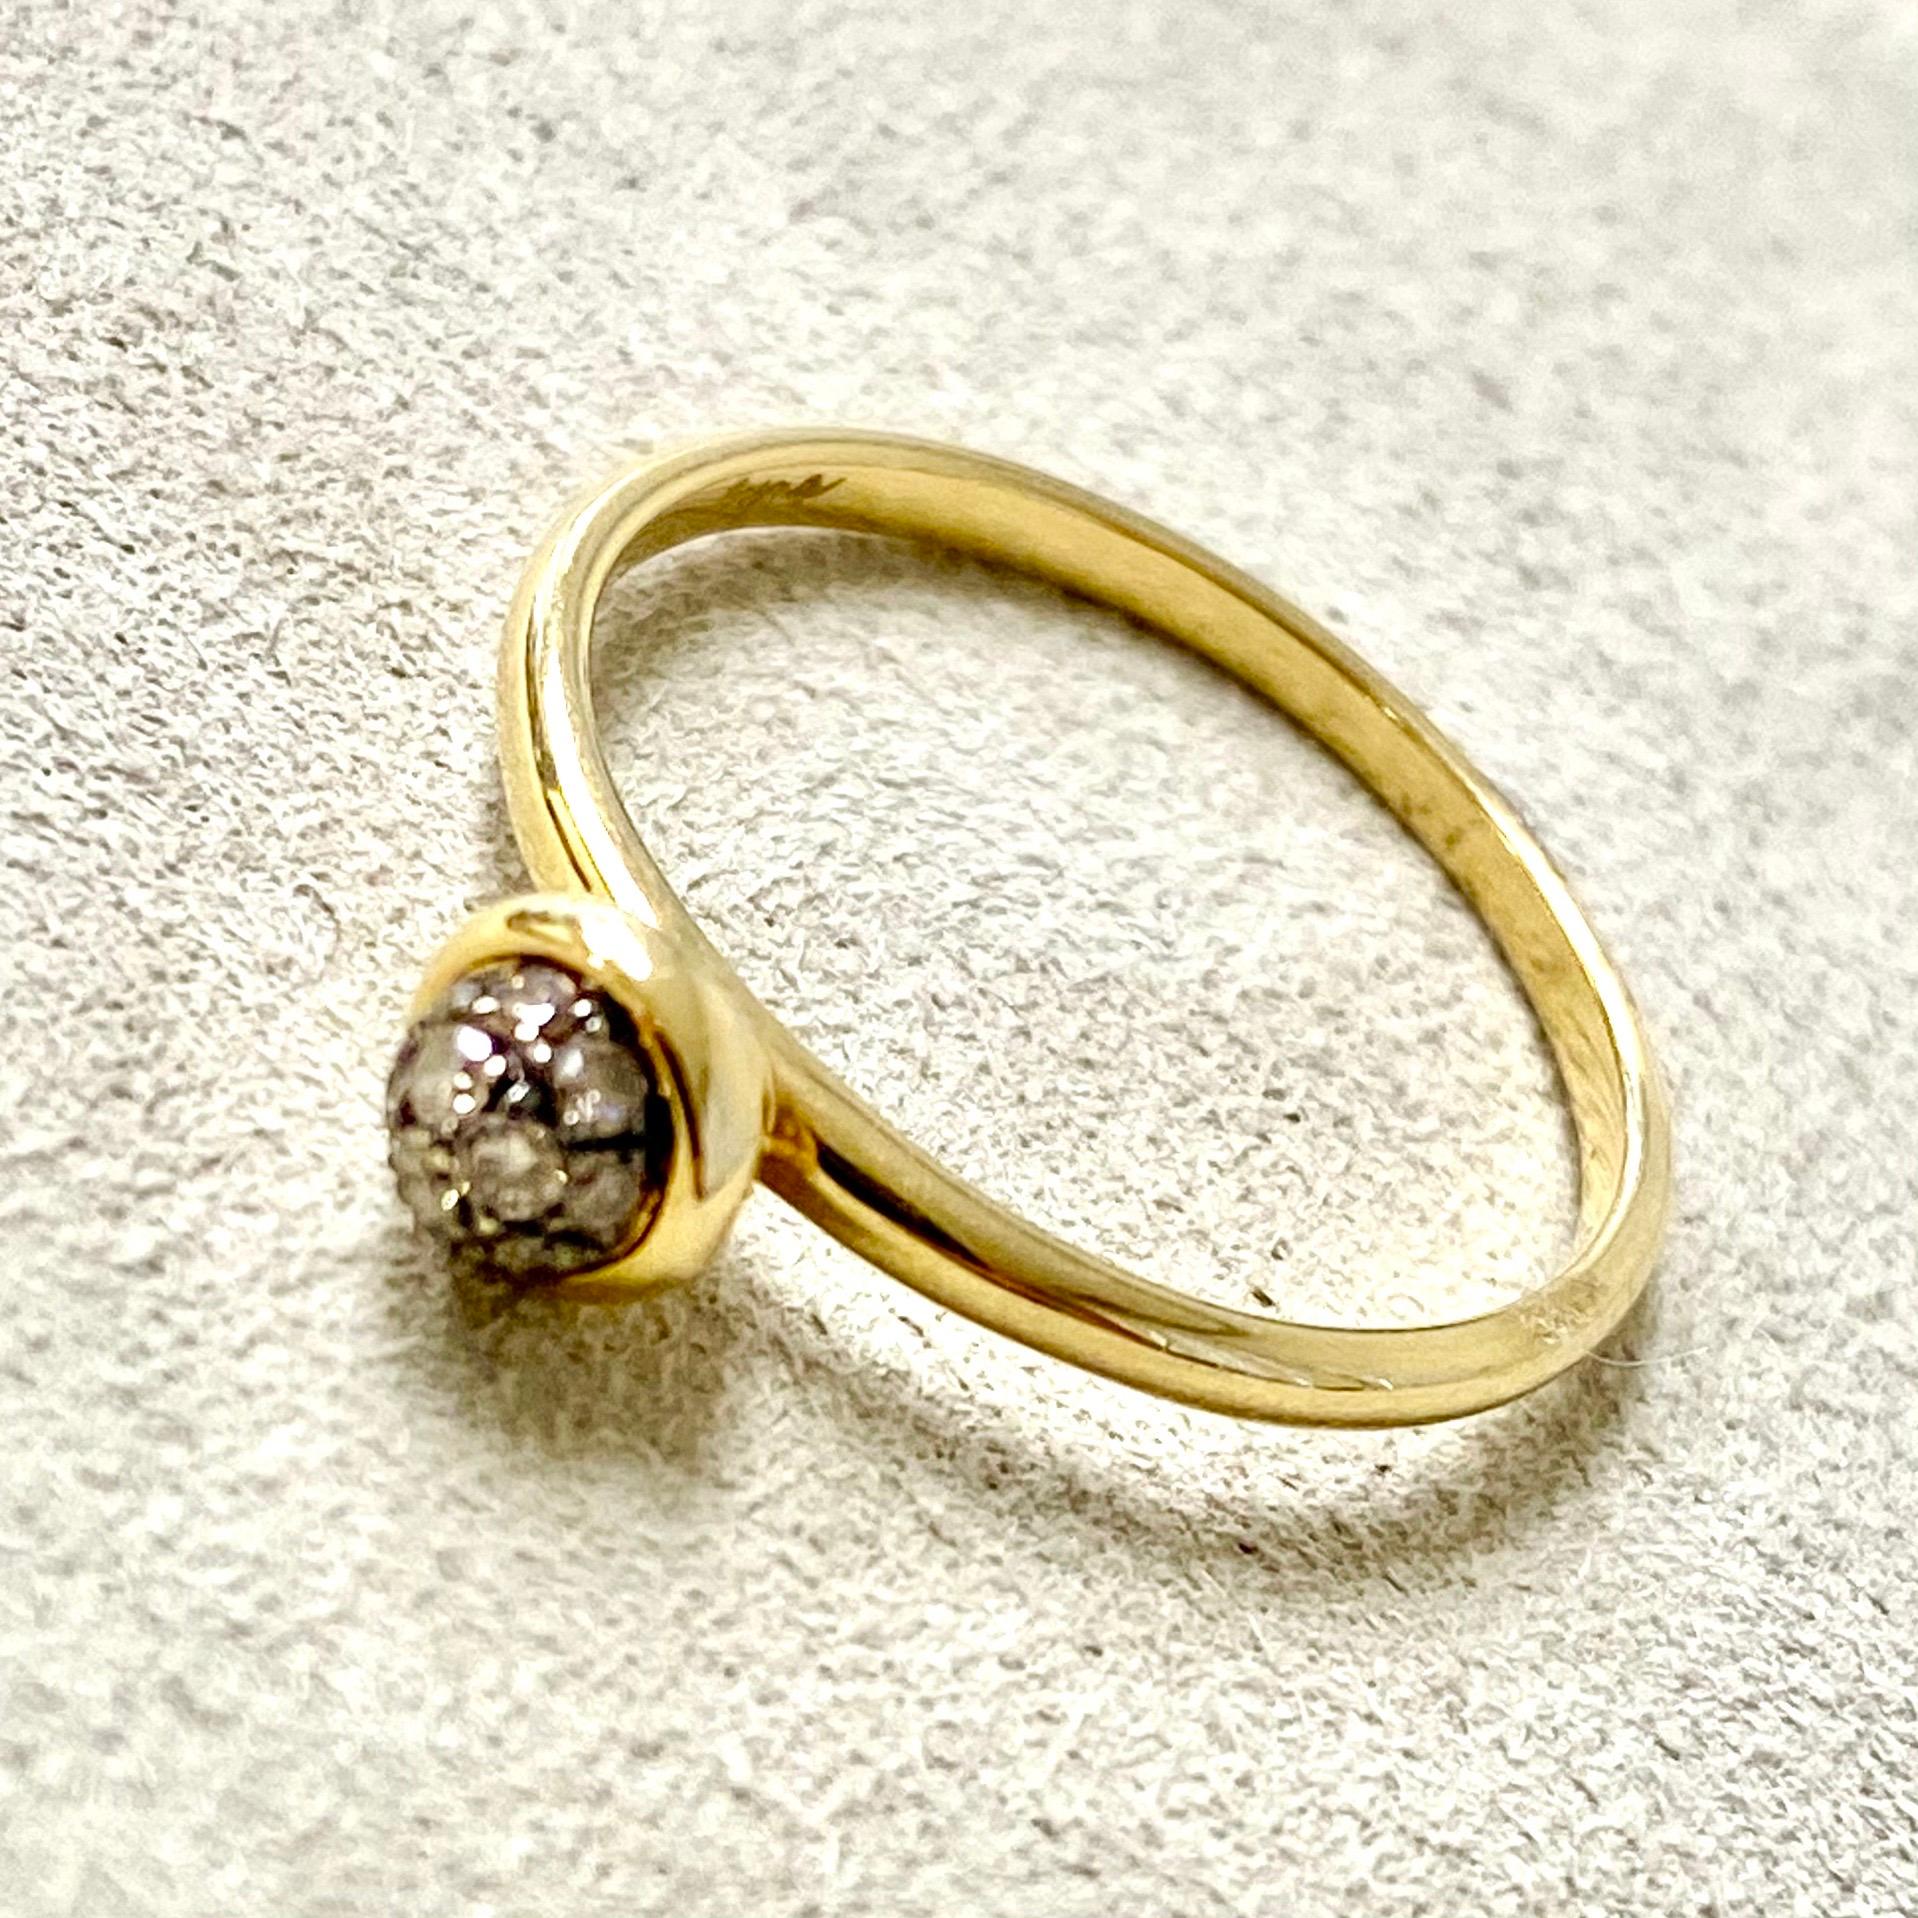 Created in 18 karat yellow gold
Diamonds 0.10 carat approx.
Dhampagne diamond pave ring 5 mm diameter approx.
Ring size US 6.5, can be sized upon request.

Crafted from 18 karat yellow gold, this dazzling ring boasts an array of champagne diamonds,